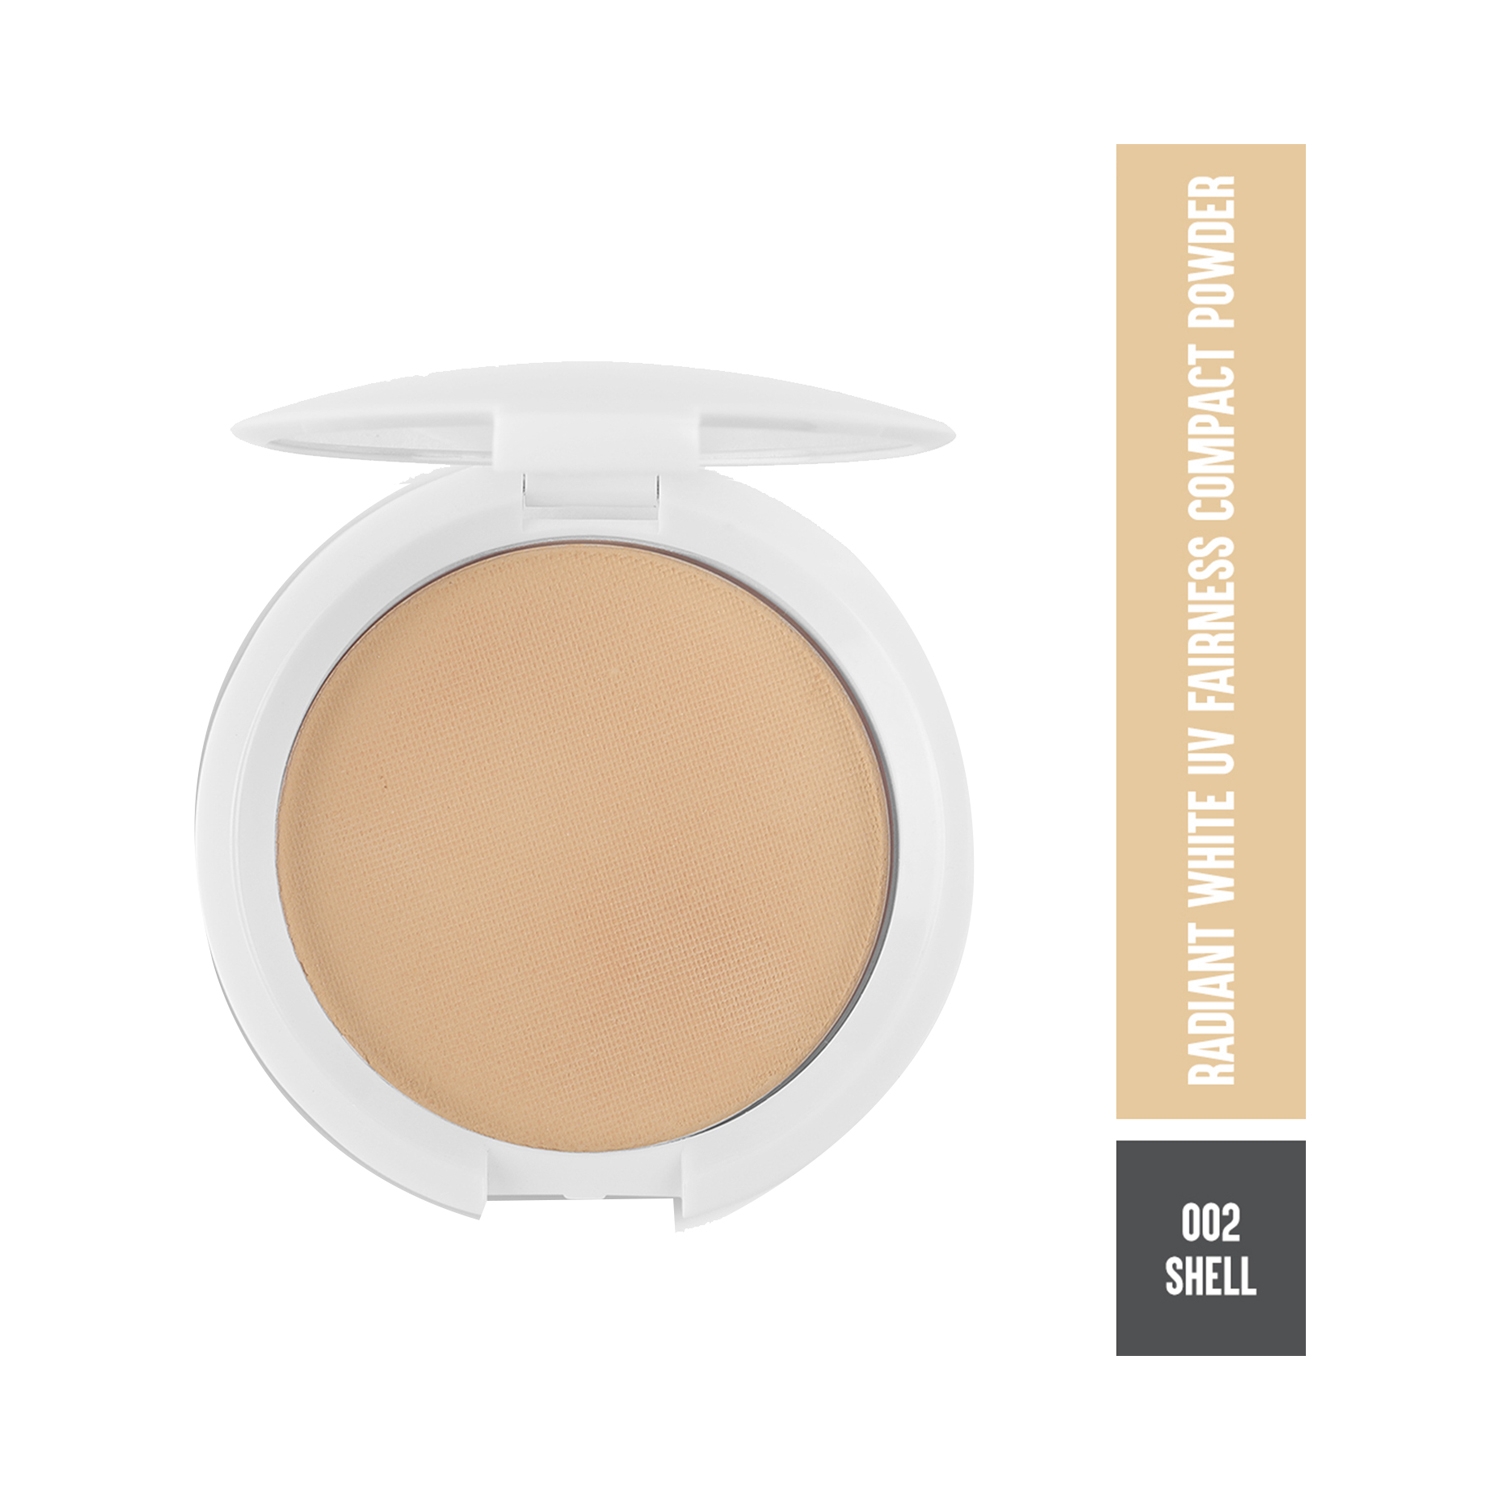 Colorbar | Colorbar Radiant White UV Fairness Compact Powder With SPF 18 - 002 Shell (9g)